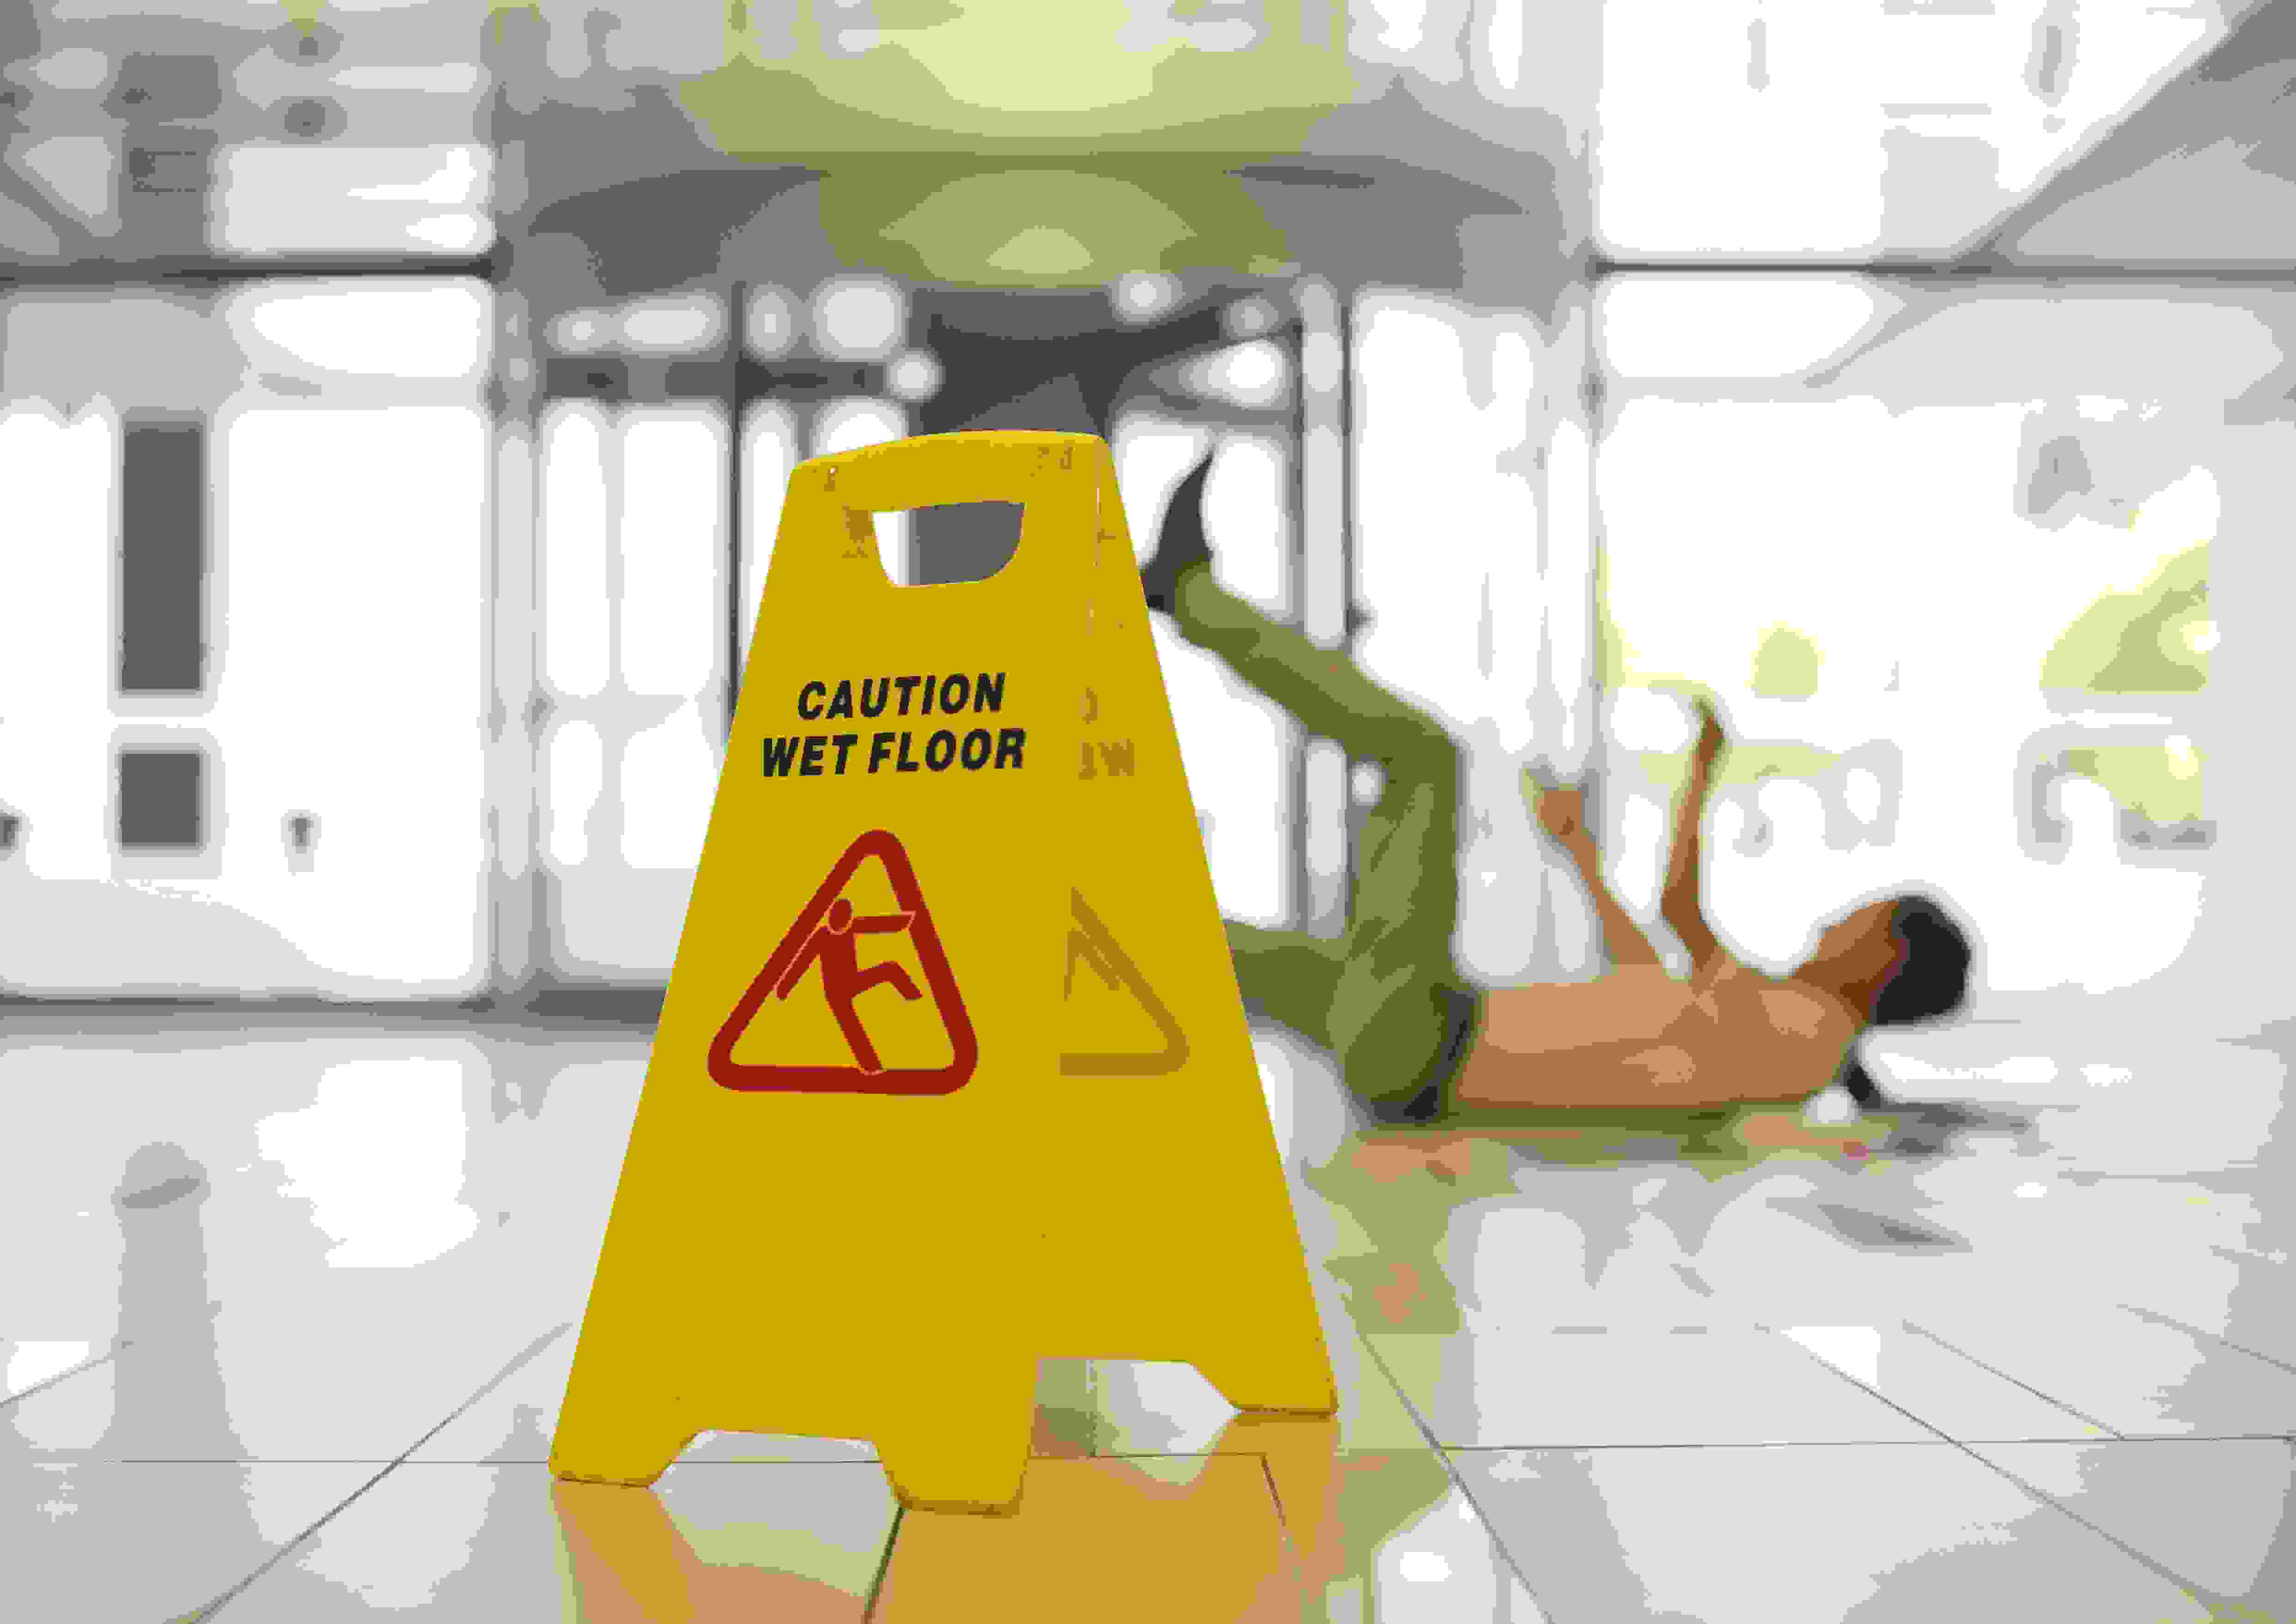 Prevent slips and trips with Liquid Spill Detection software